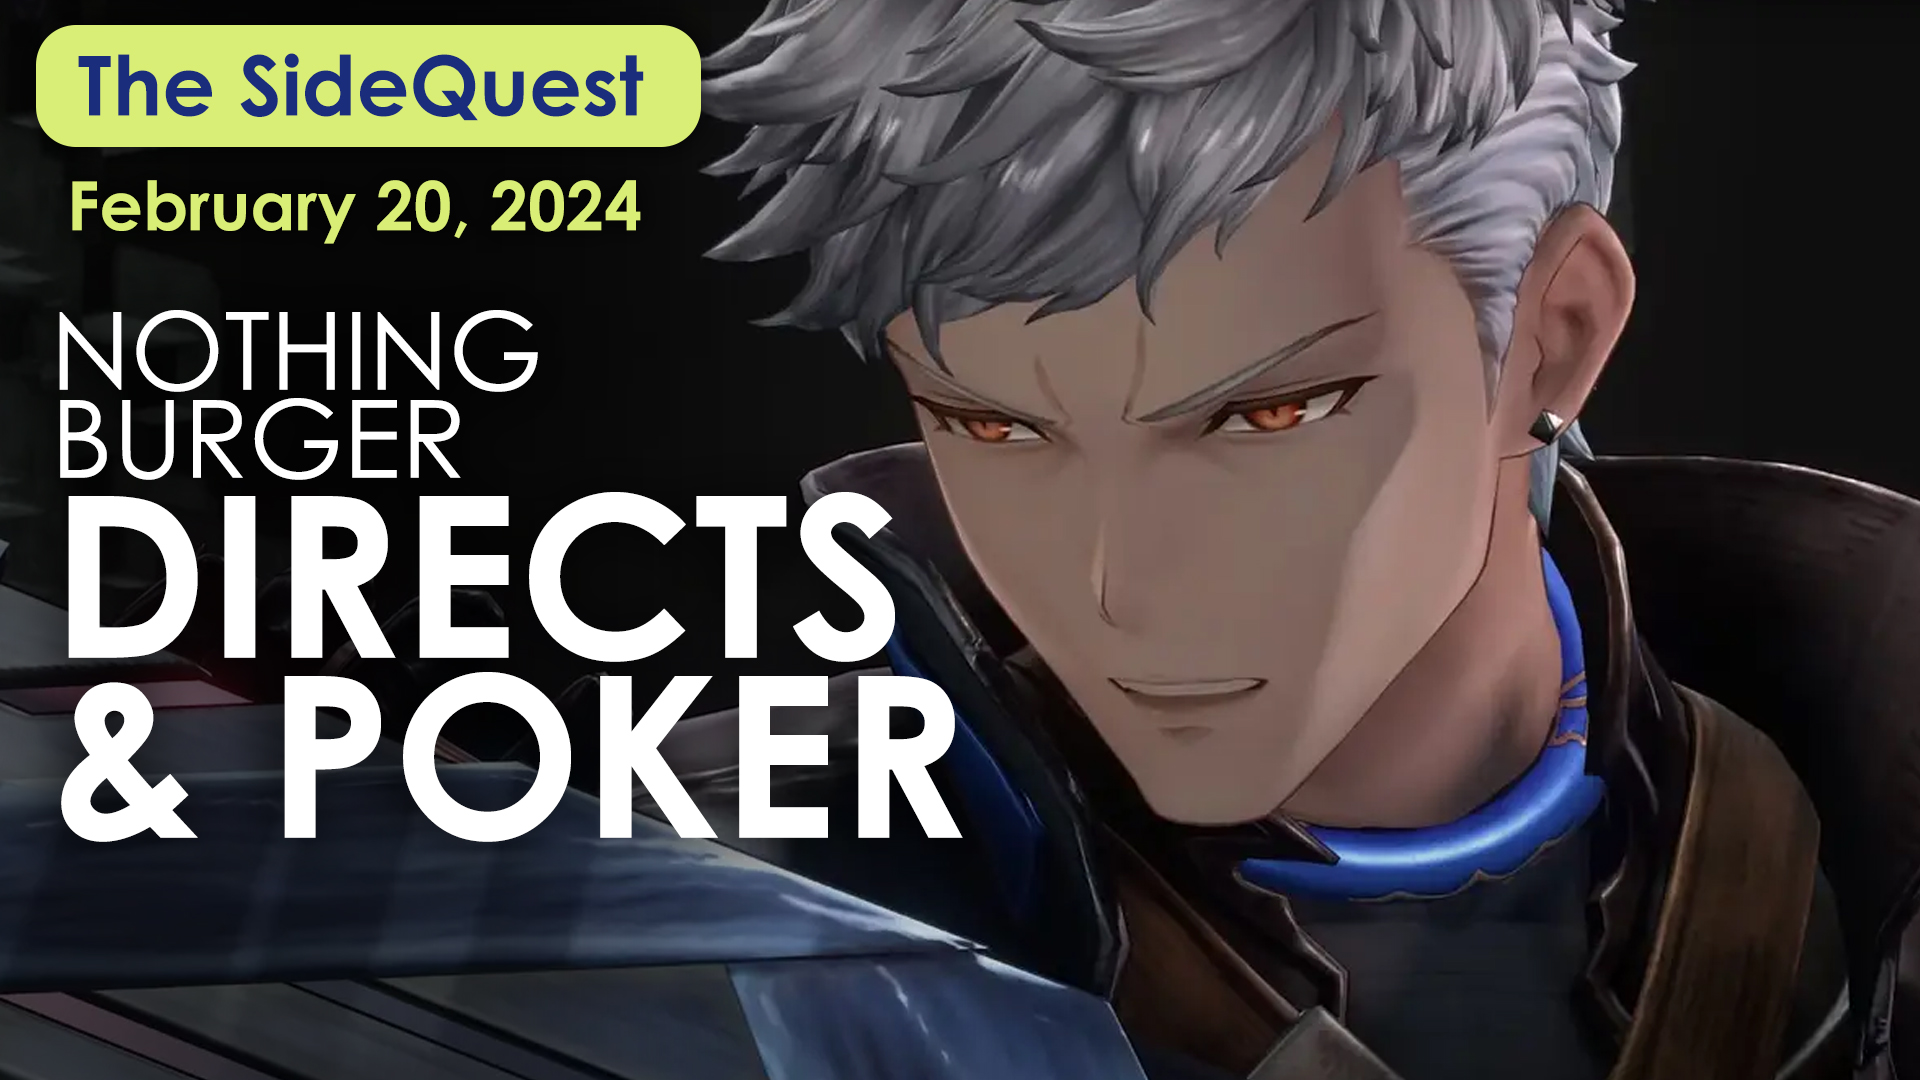 The SideQuest LIVE! February 20, 2024: Nothingburger Directs and Poker